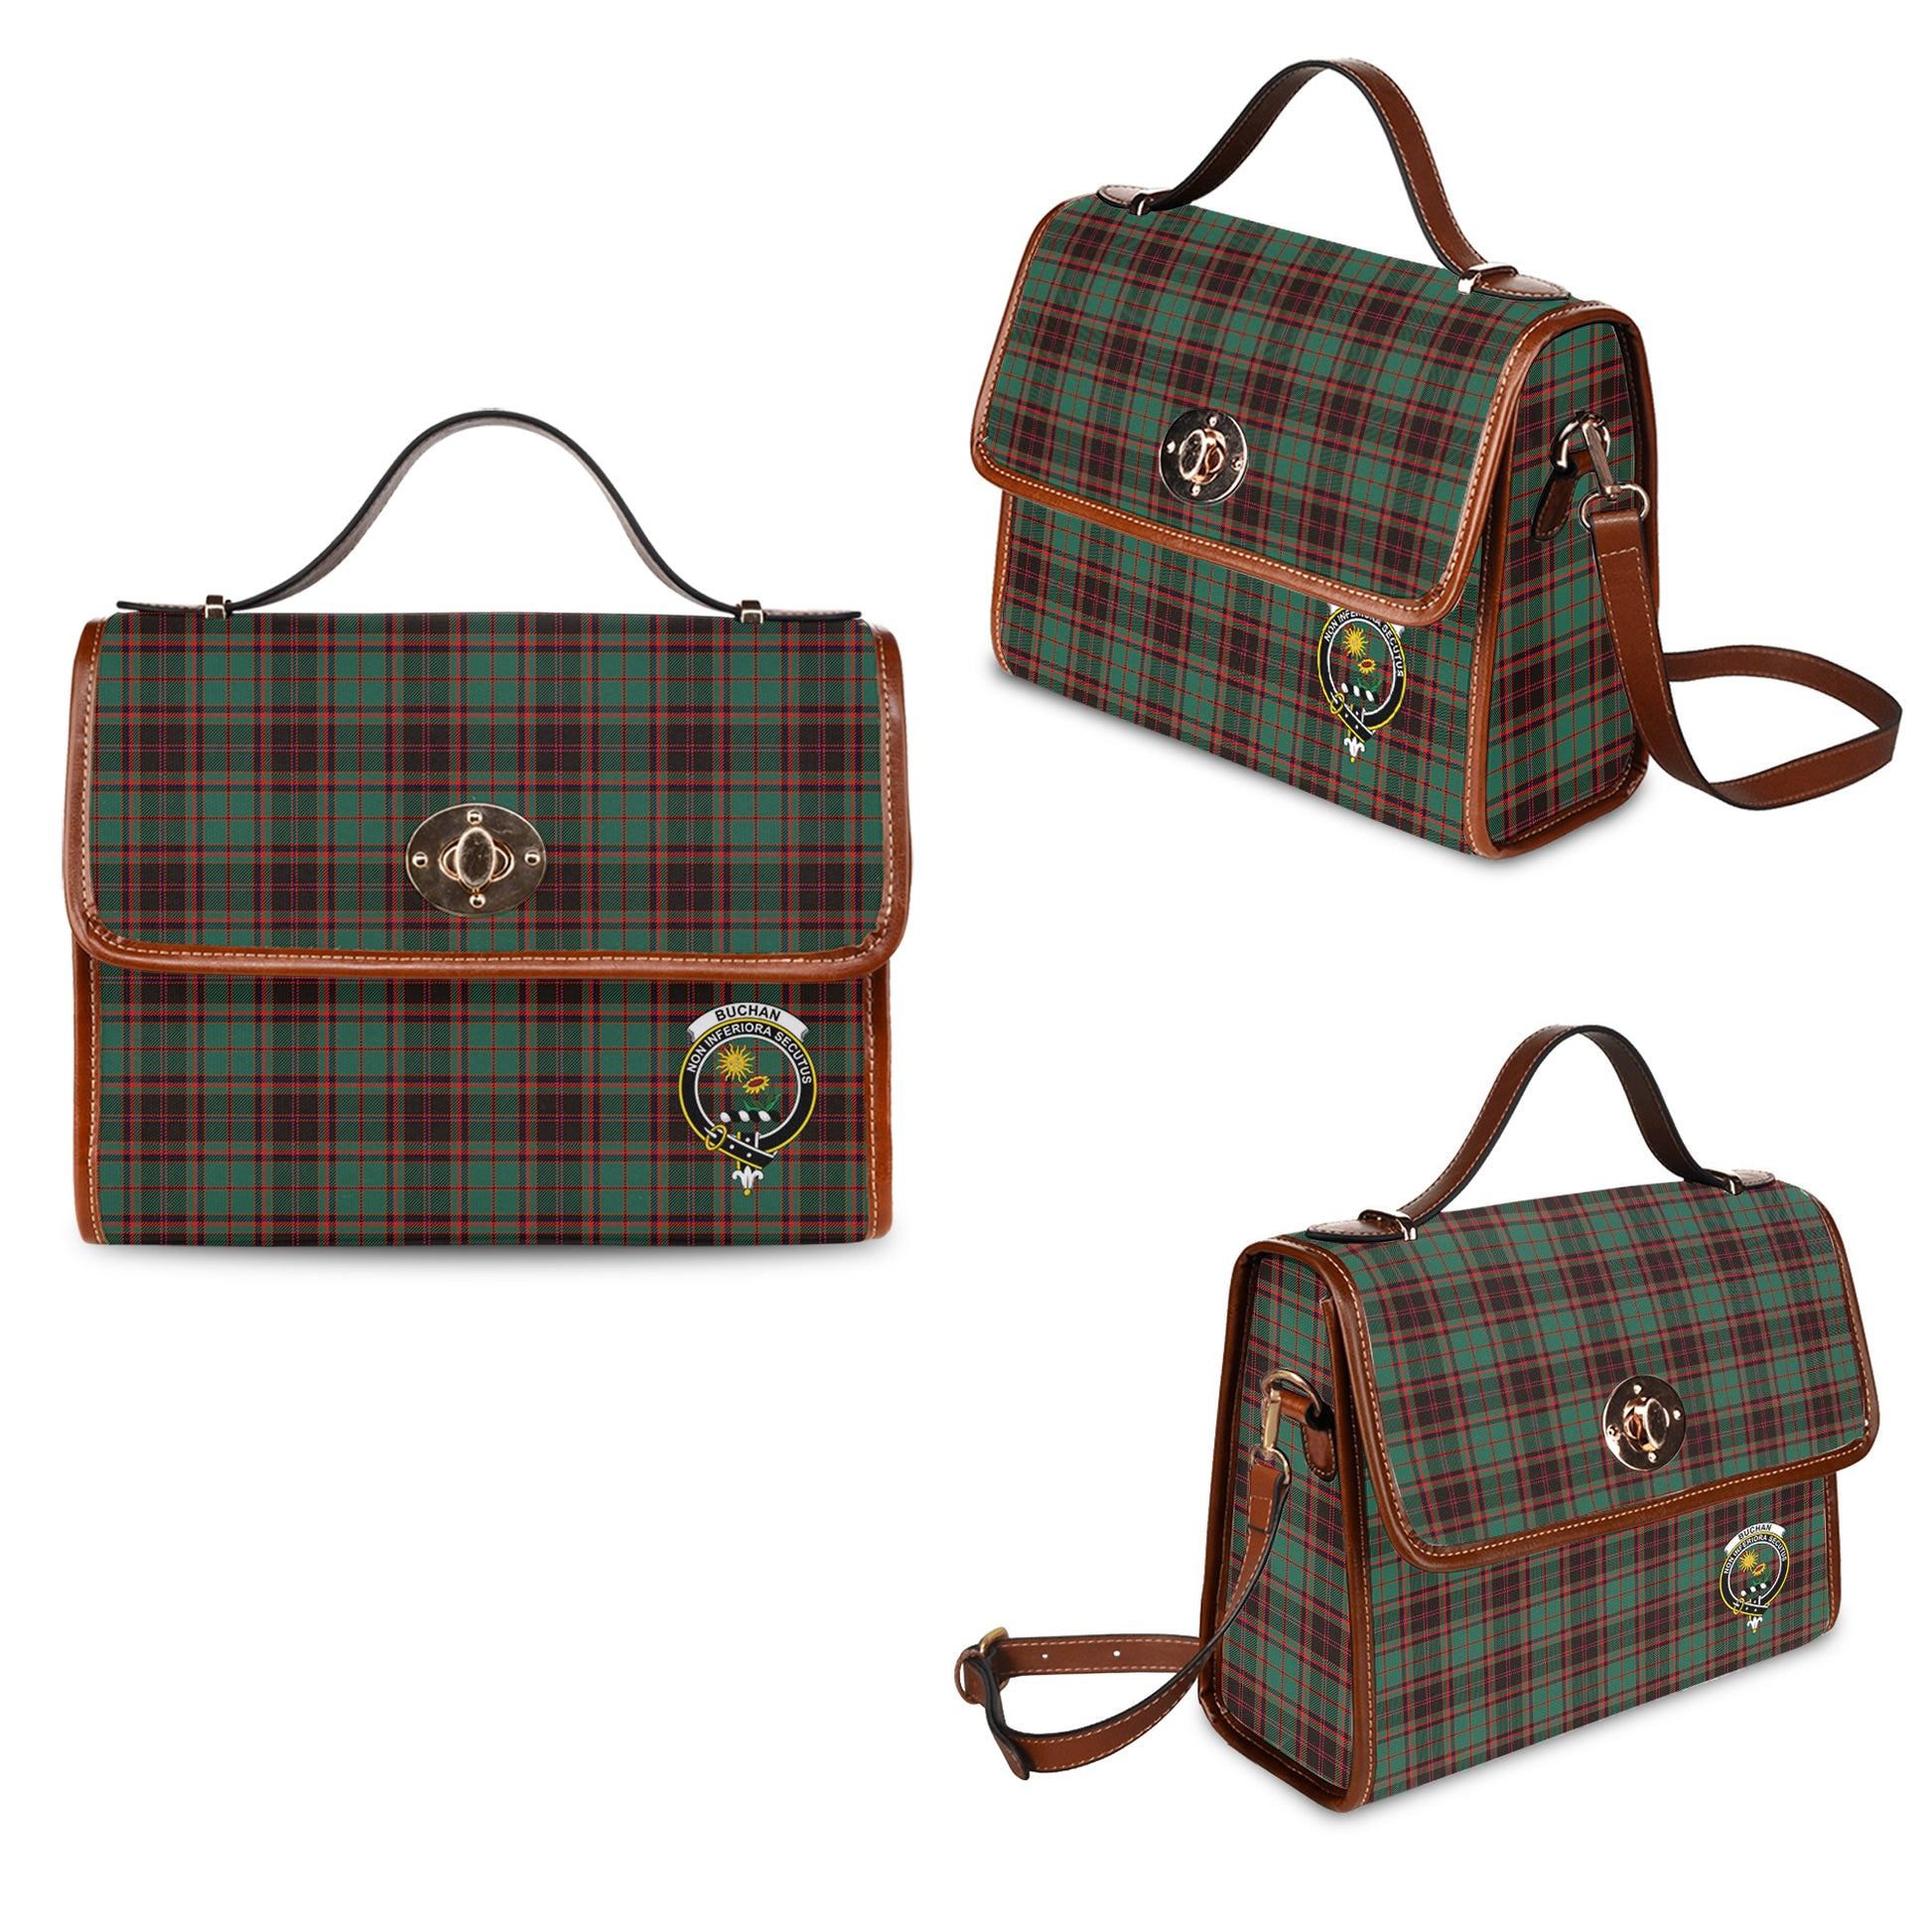 Buchan Ancient Tartan Leather Strap Waterproof Canvas Bag with Family Crest One Size 34cm * 42cm (13.4" x 16.5") - Tartanvibesclothing